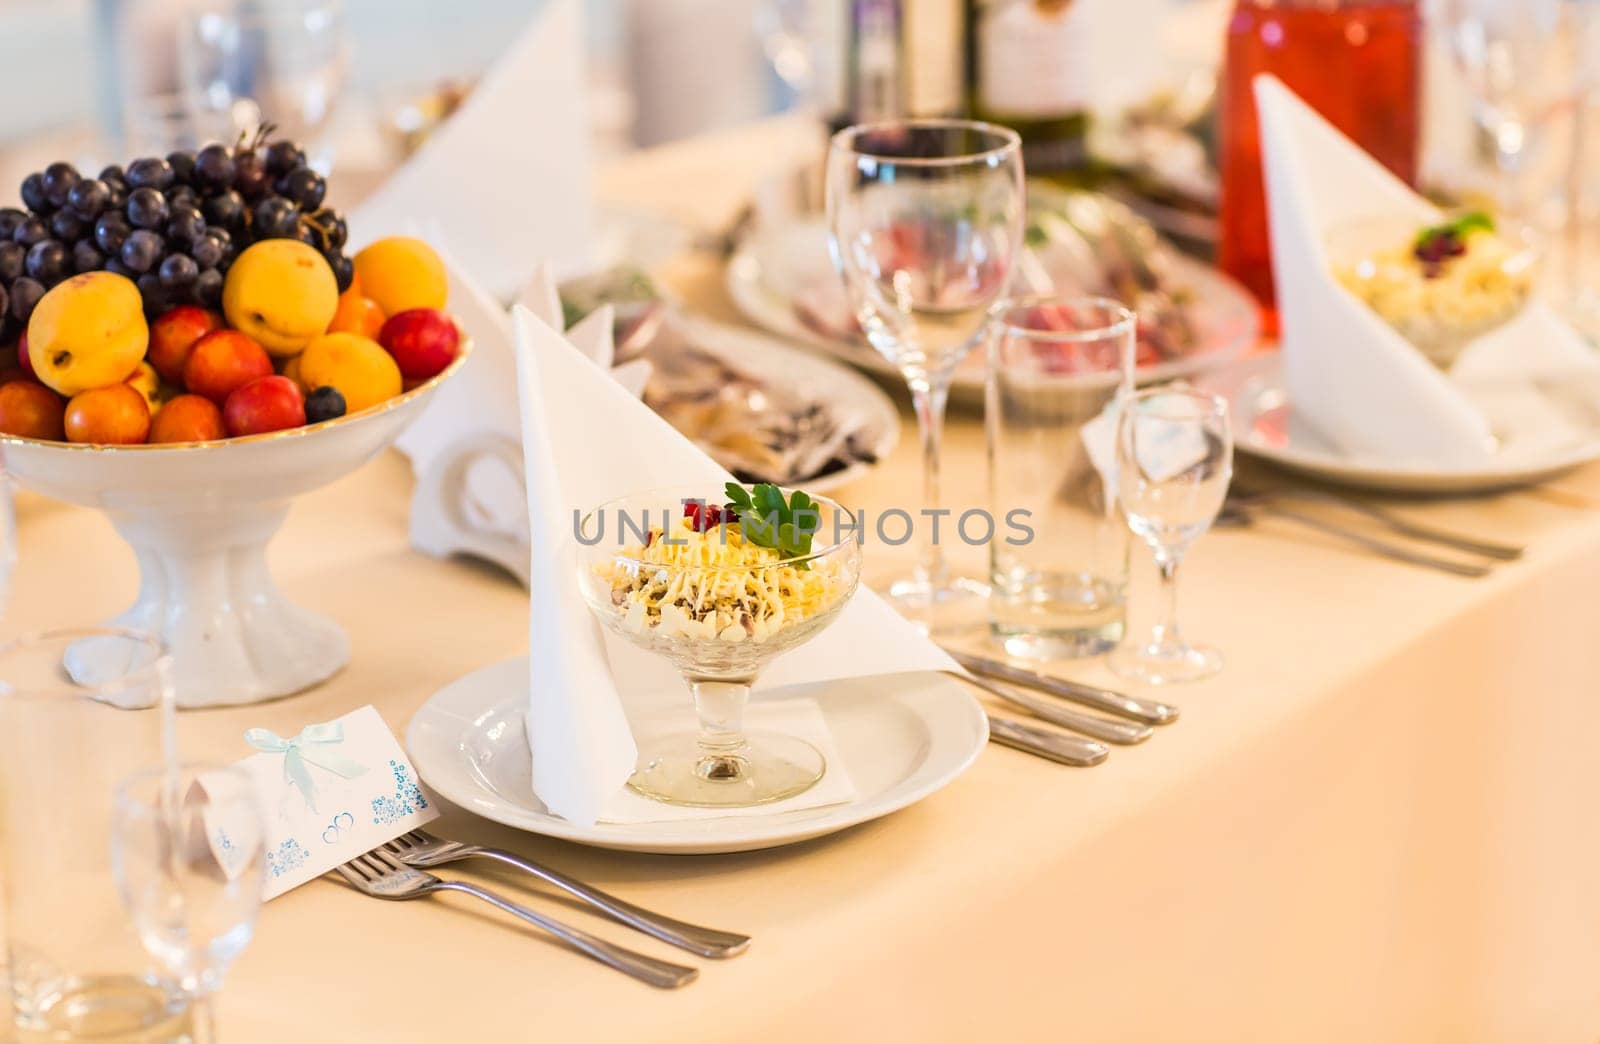 Served for a banquet table. Wine glasses with napkins, plate and salads